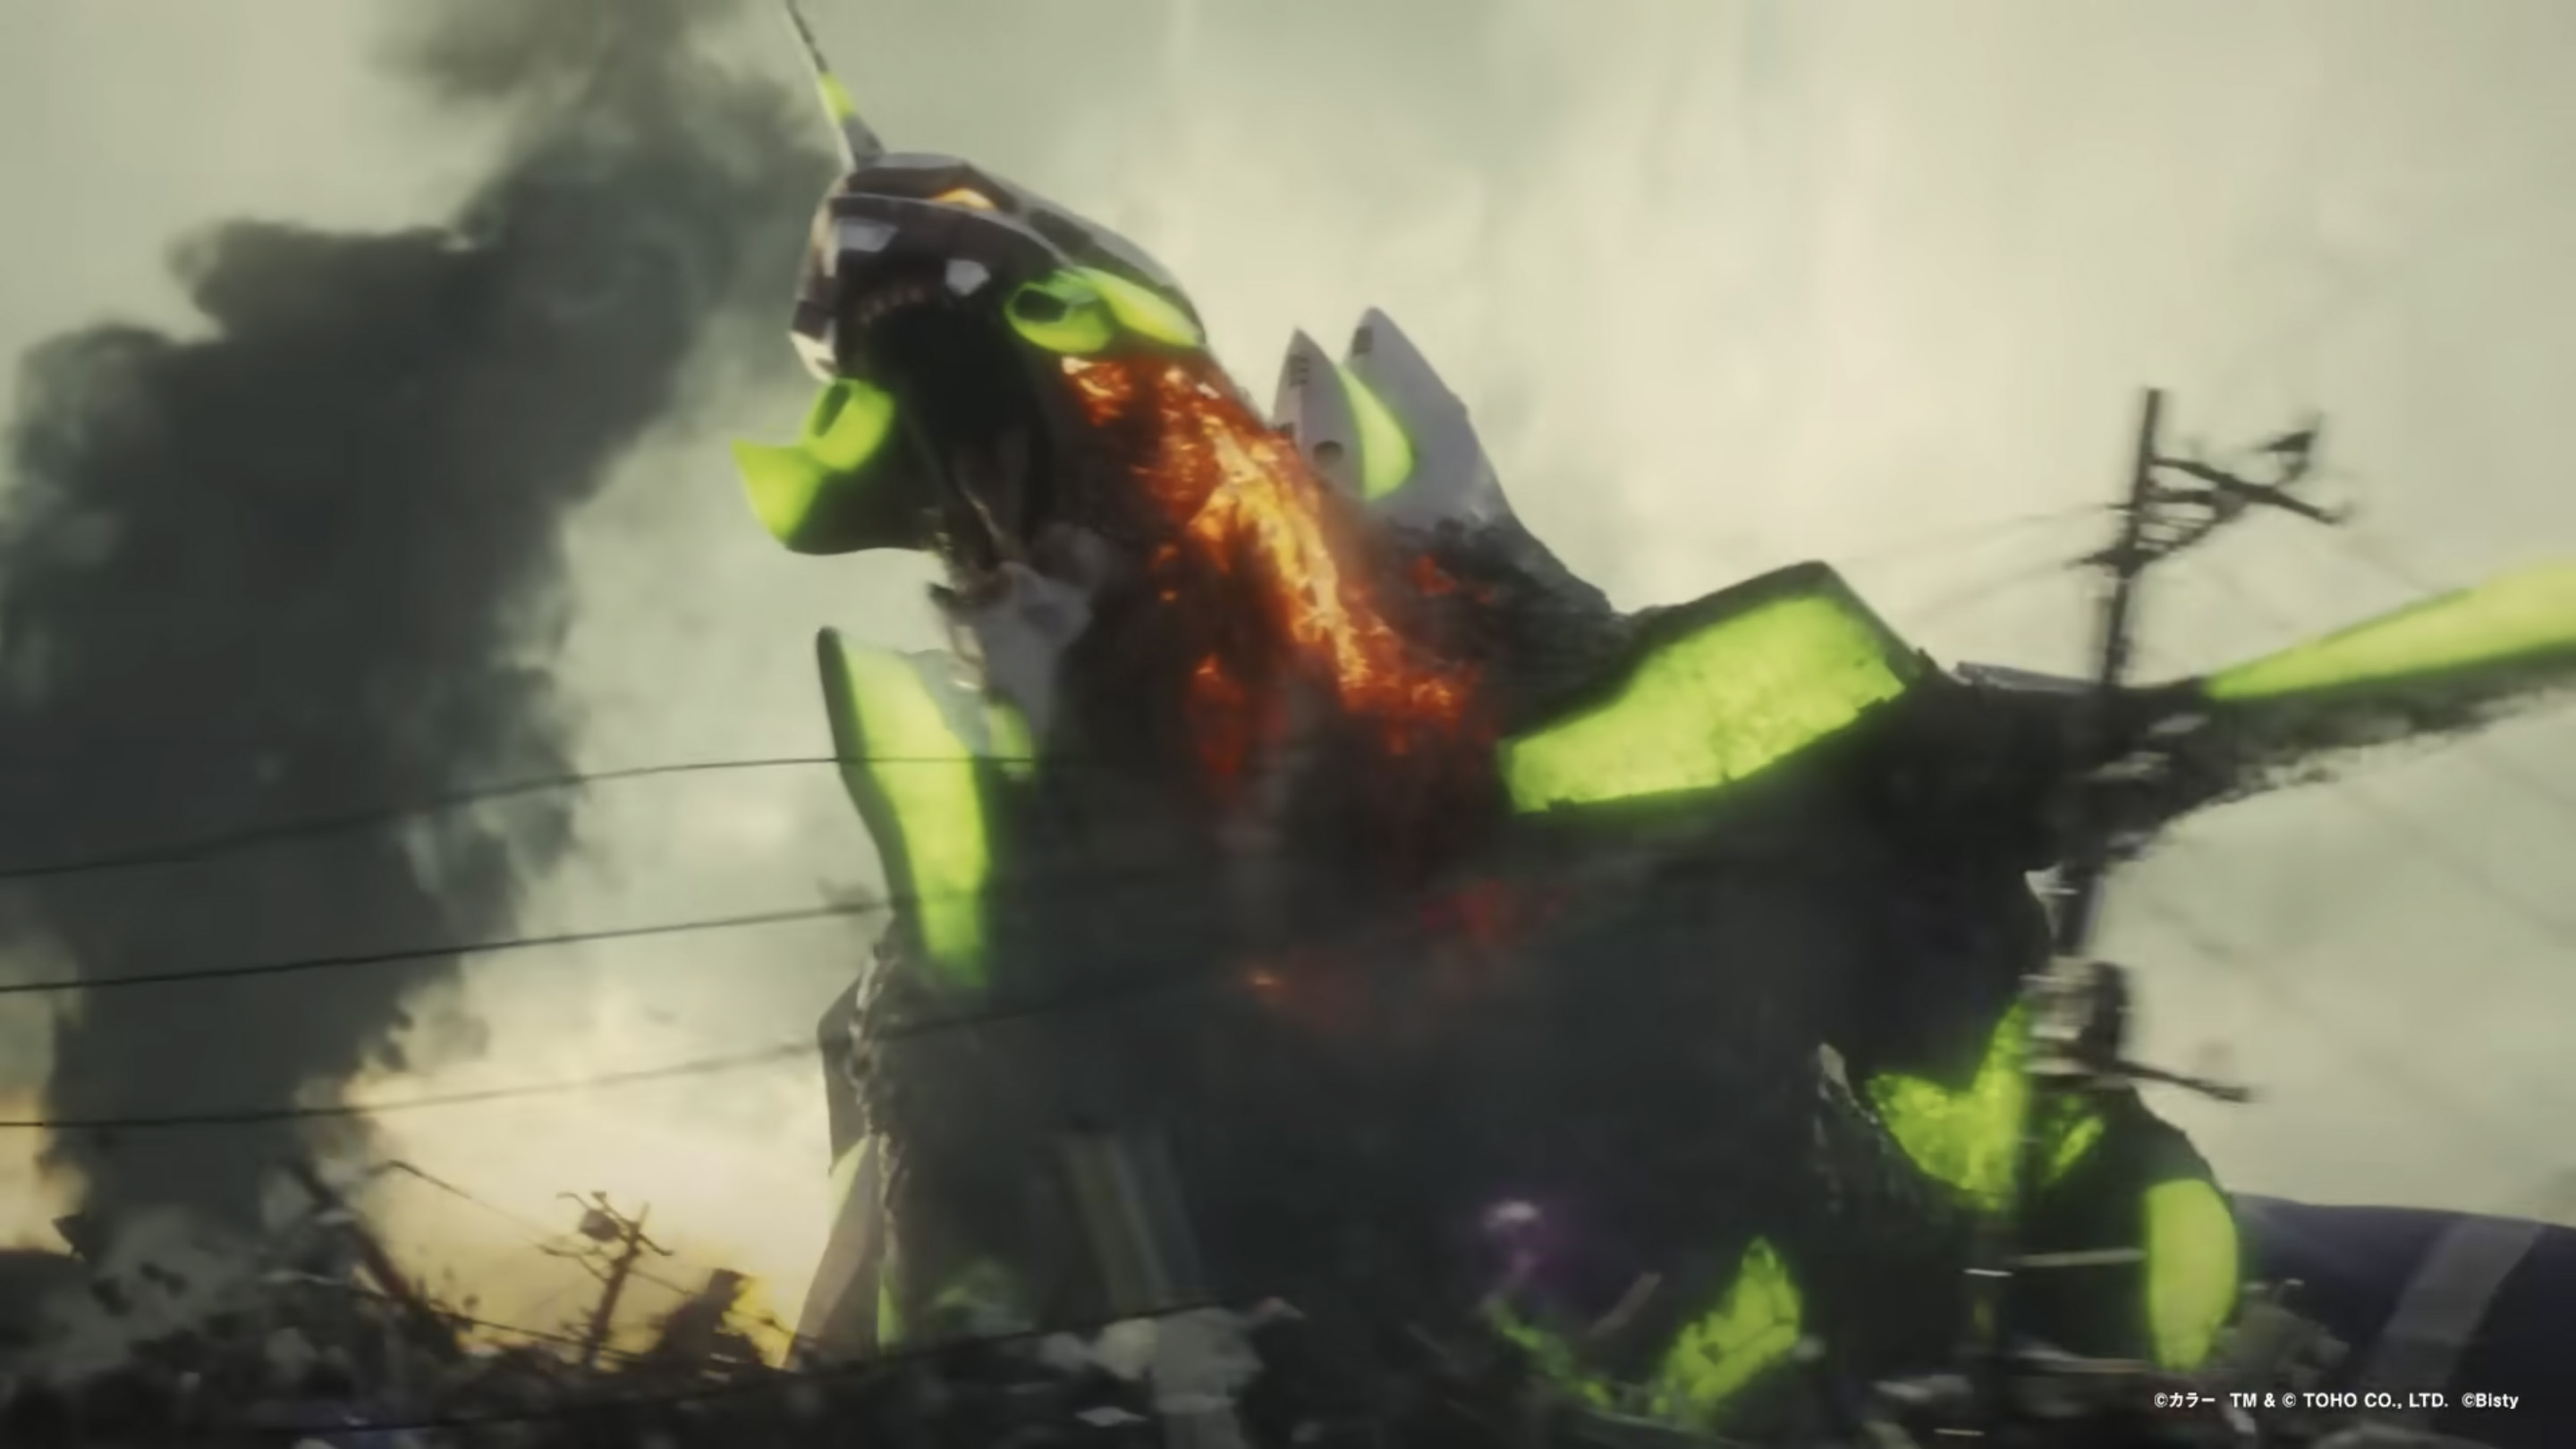 <div>Shin Godzilla Teams up With Evangelion's Unit 01 to Take Down Ghidorah in Pachinko Collab</div>